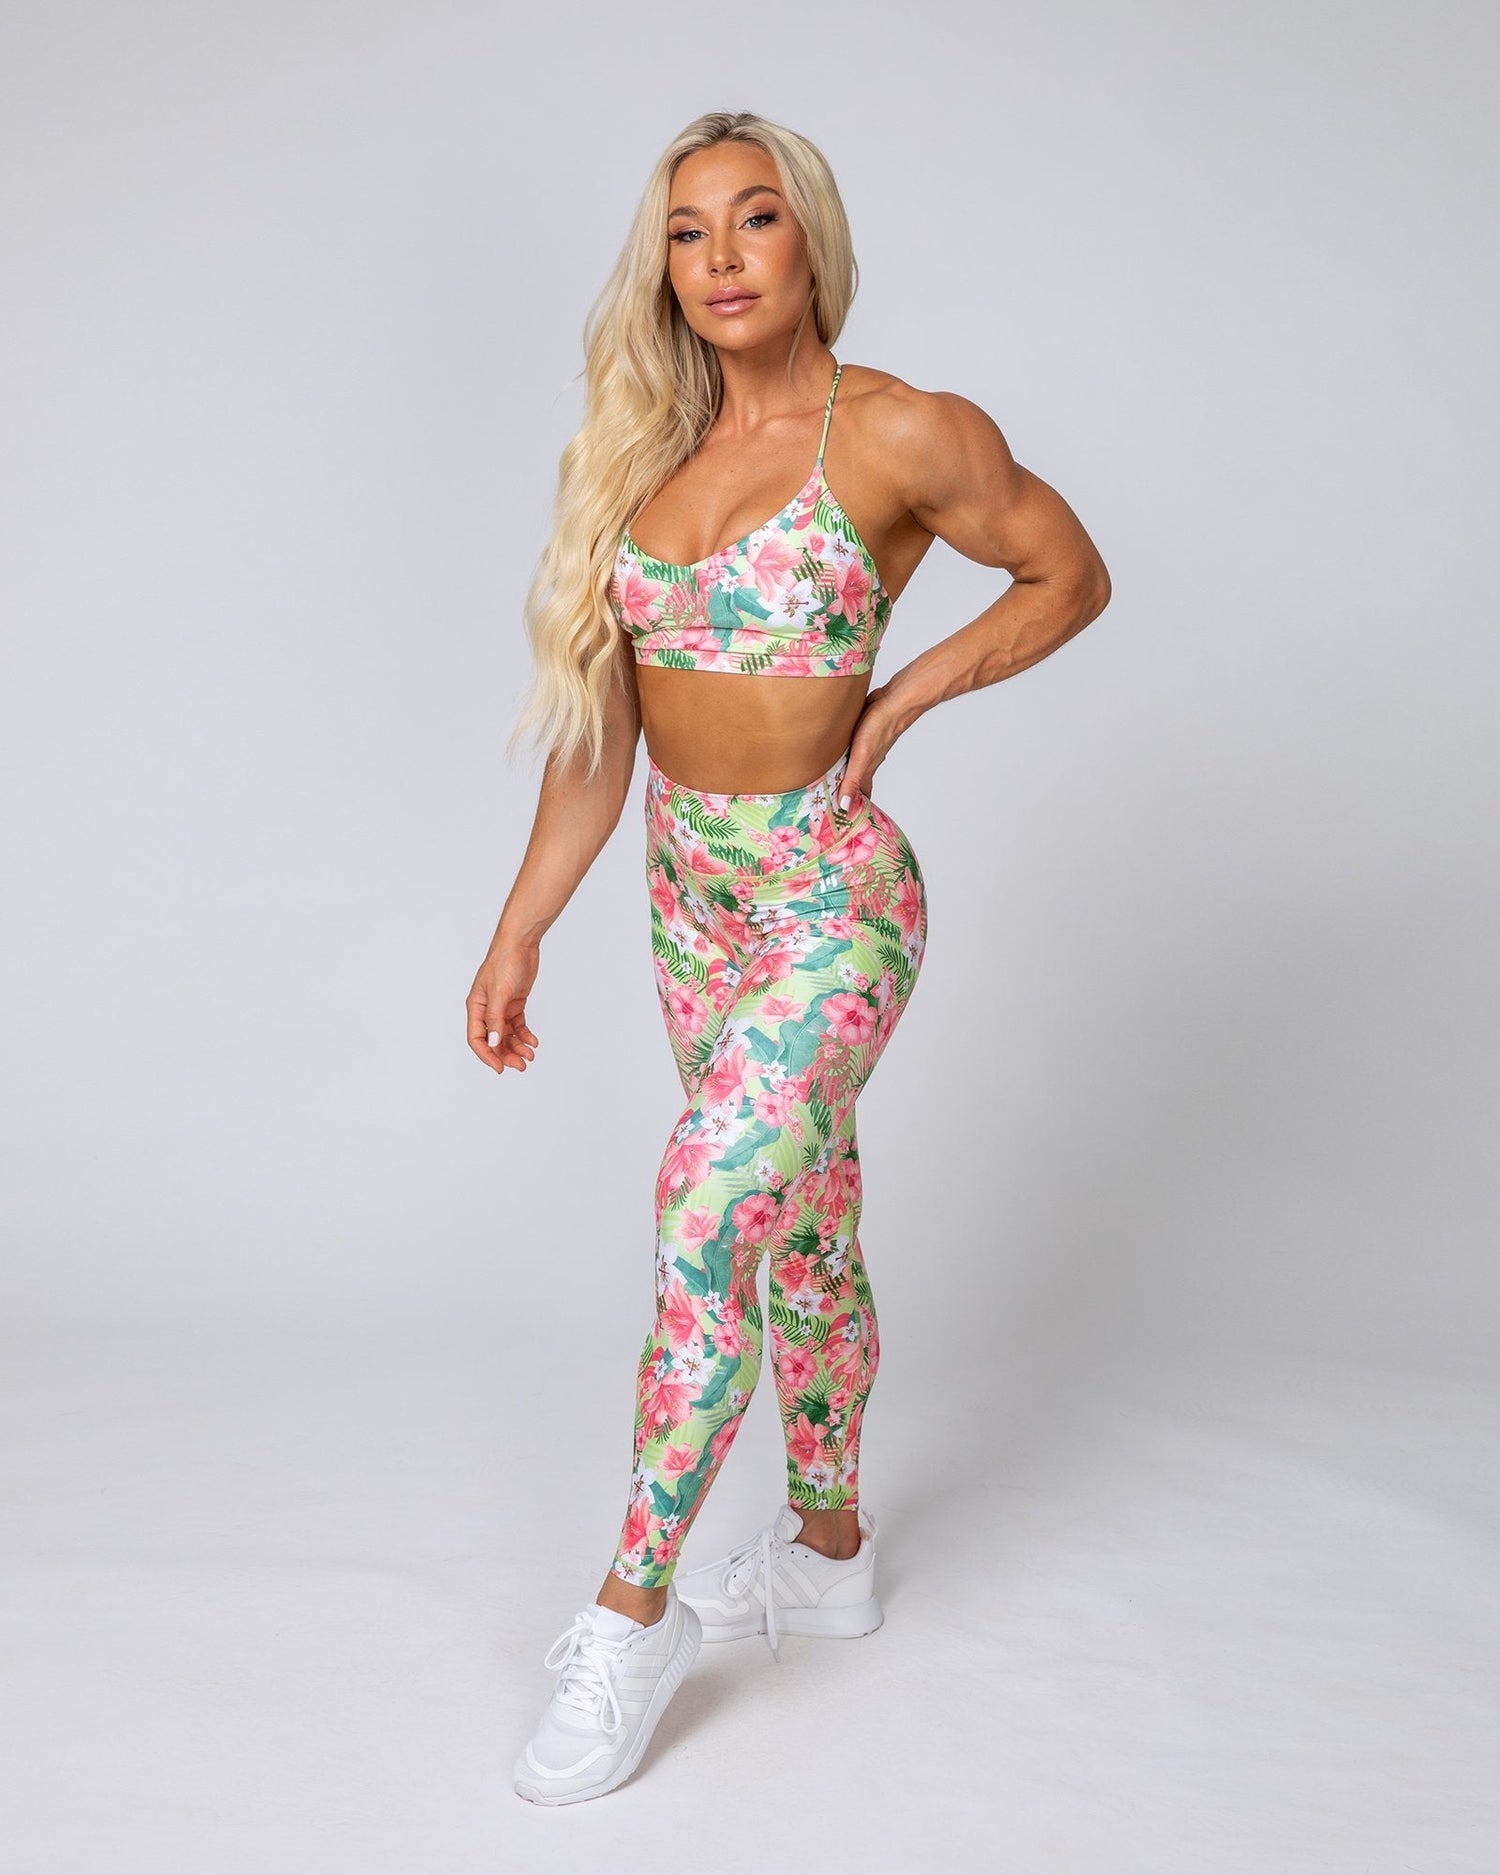 Gym clothes women, Muscle Nation, Clothes gym, Activewear for women, Gym clothes for women, Australian Activewear, Australian Activewear brands, Gym leggings for women, Squat proof leggings, Leggings for women, Womens gym tights, Supportive leggings, Scrunch bum tights, High waisted leggings